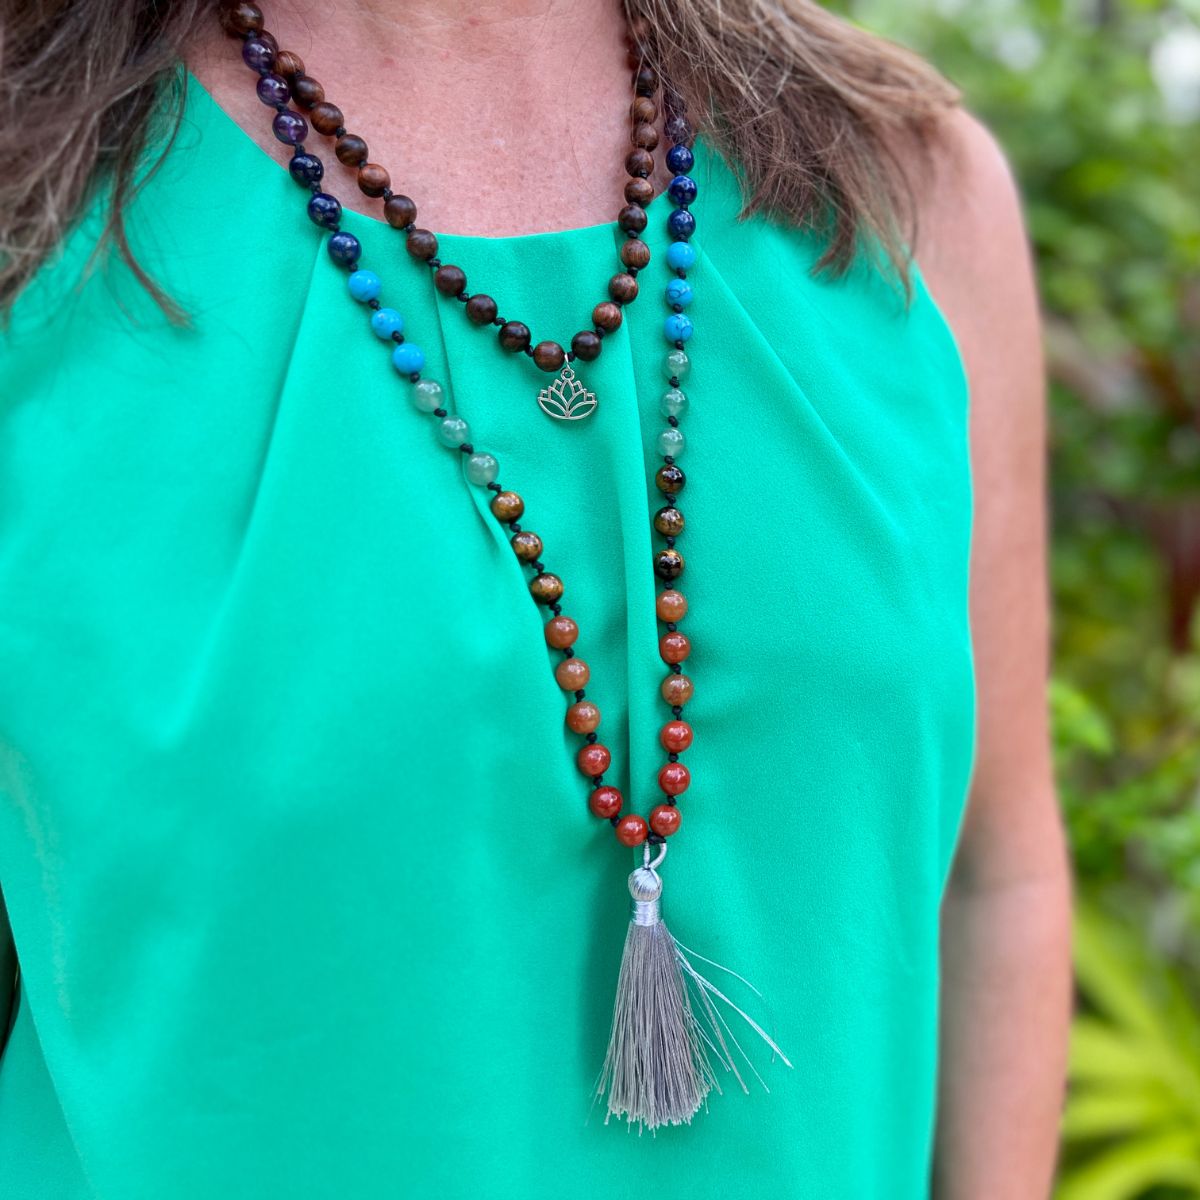 Elevate your meditation practice with the 108 Beads Wood Meditation Necklace - the perfect accessory for balancing your chakras and promoting inner peace. 